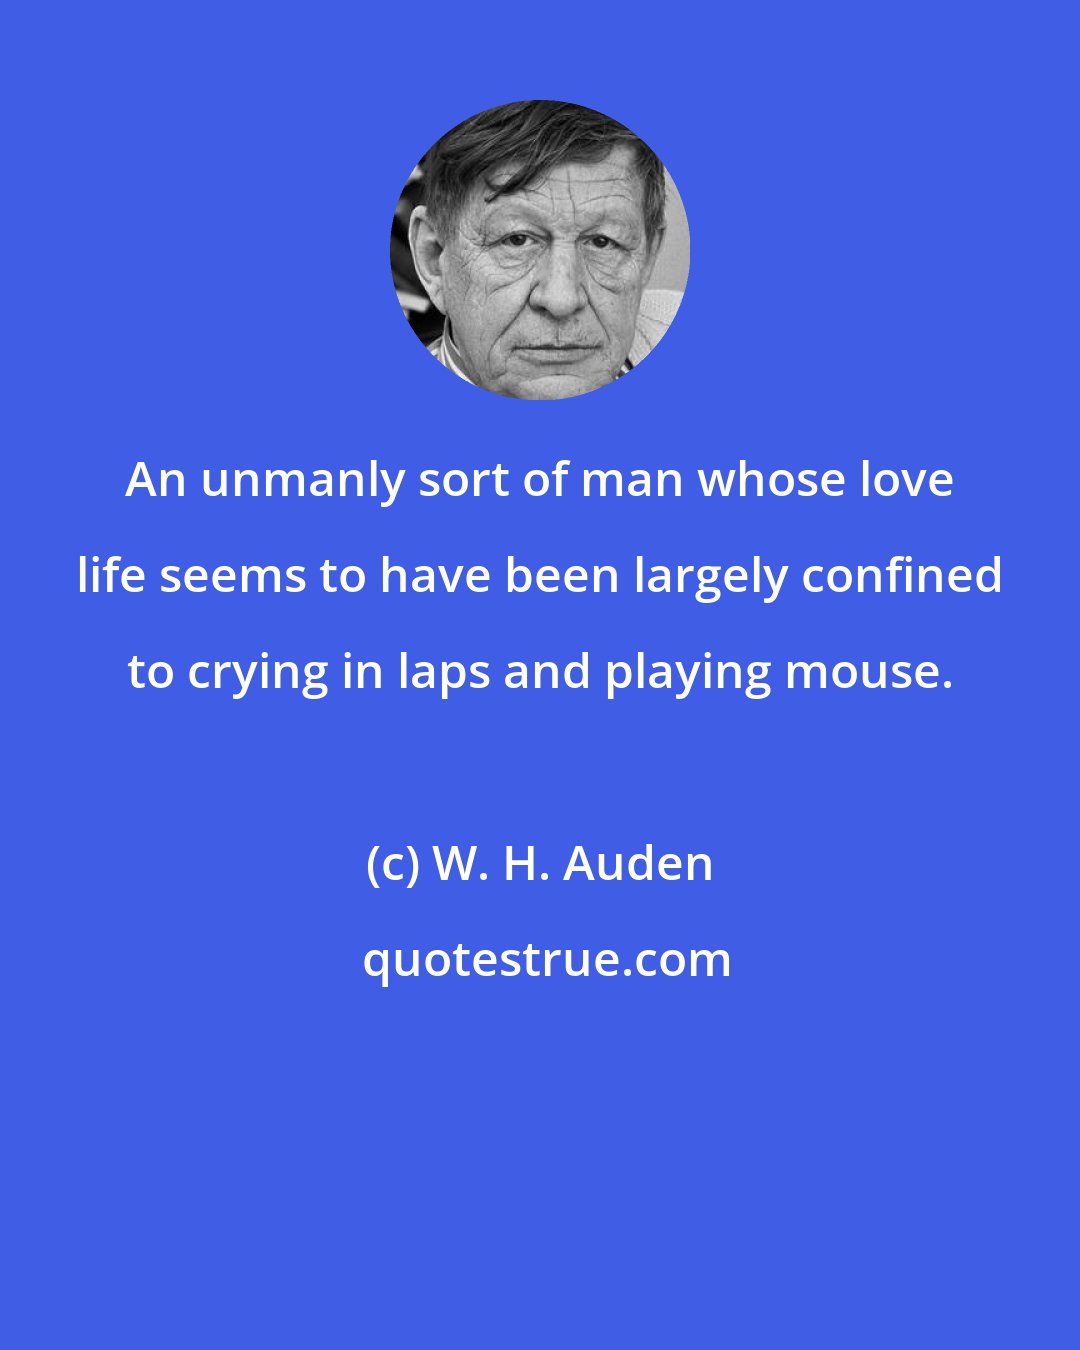 W. H. Auden: An unmanly sort of man whose love life seems to have been largely confined to crying in laps and playing mouse.